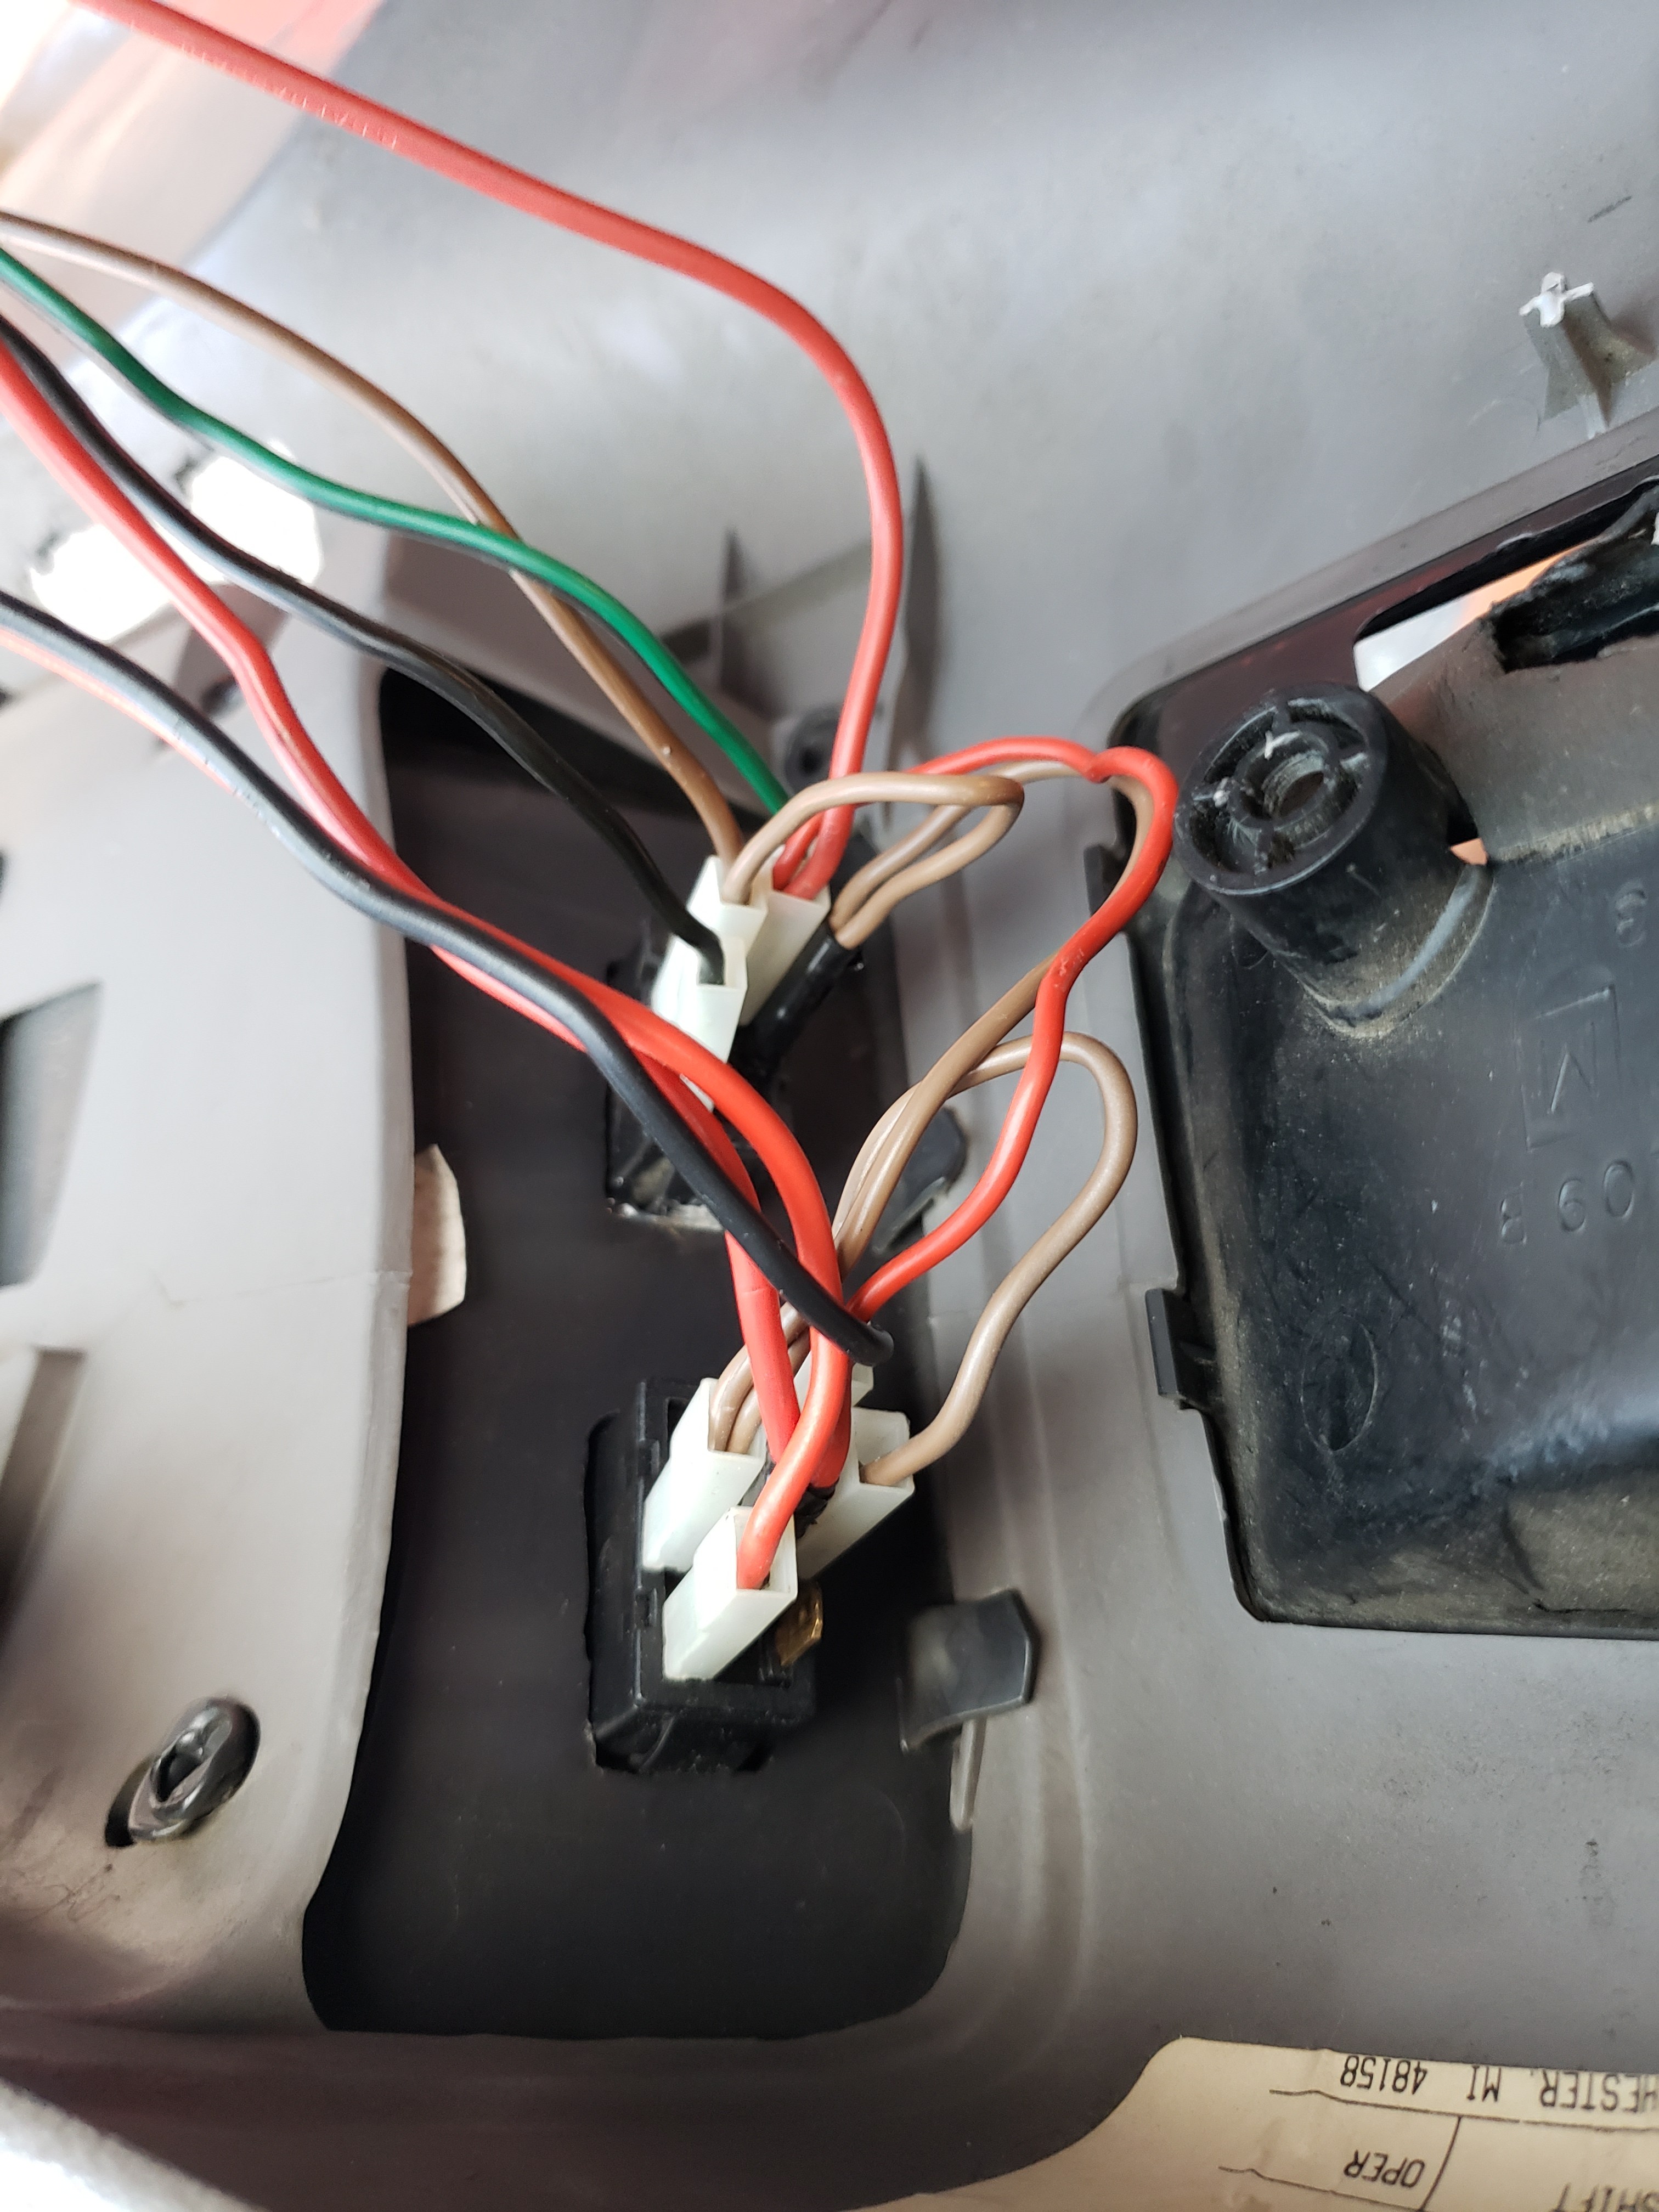 inspecting and reconnecting power window power wires